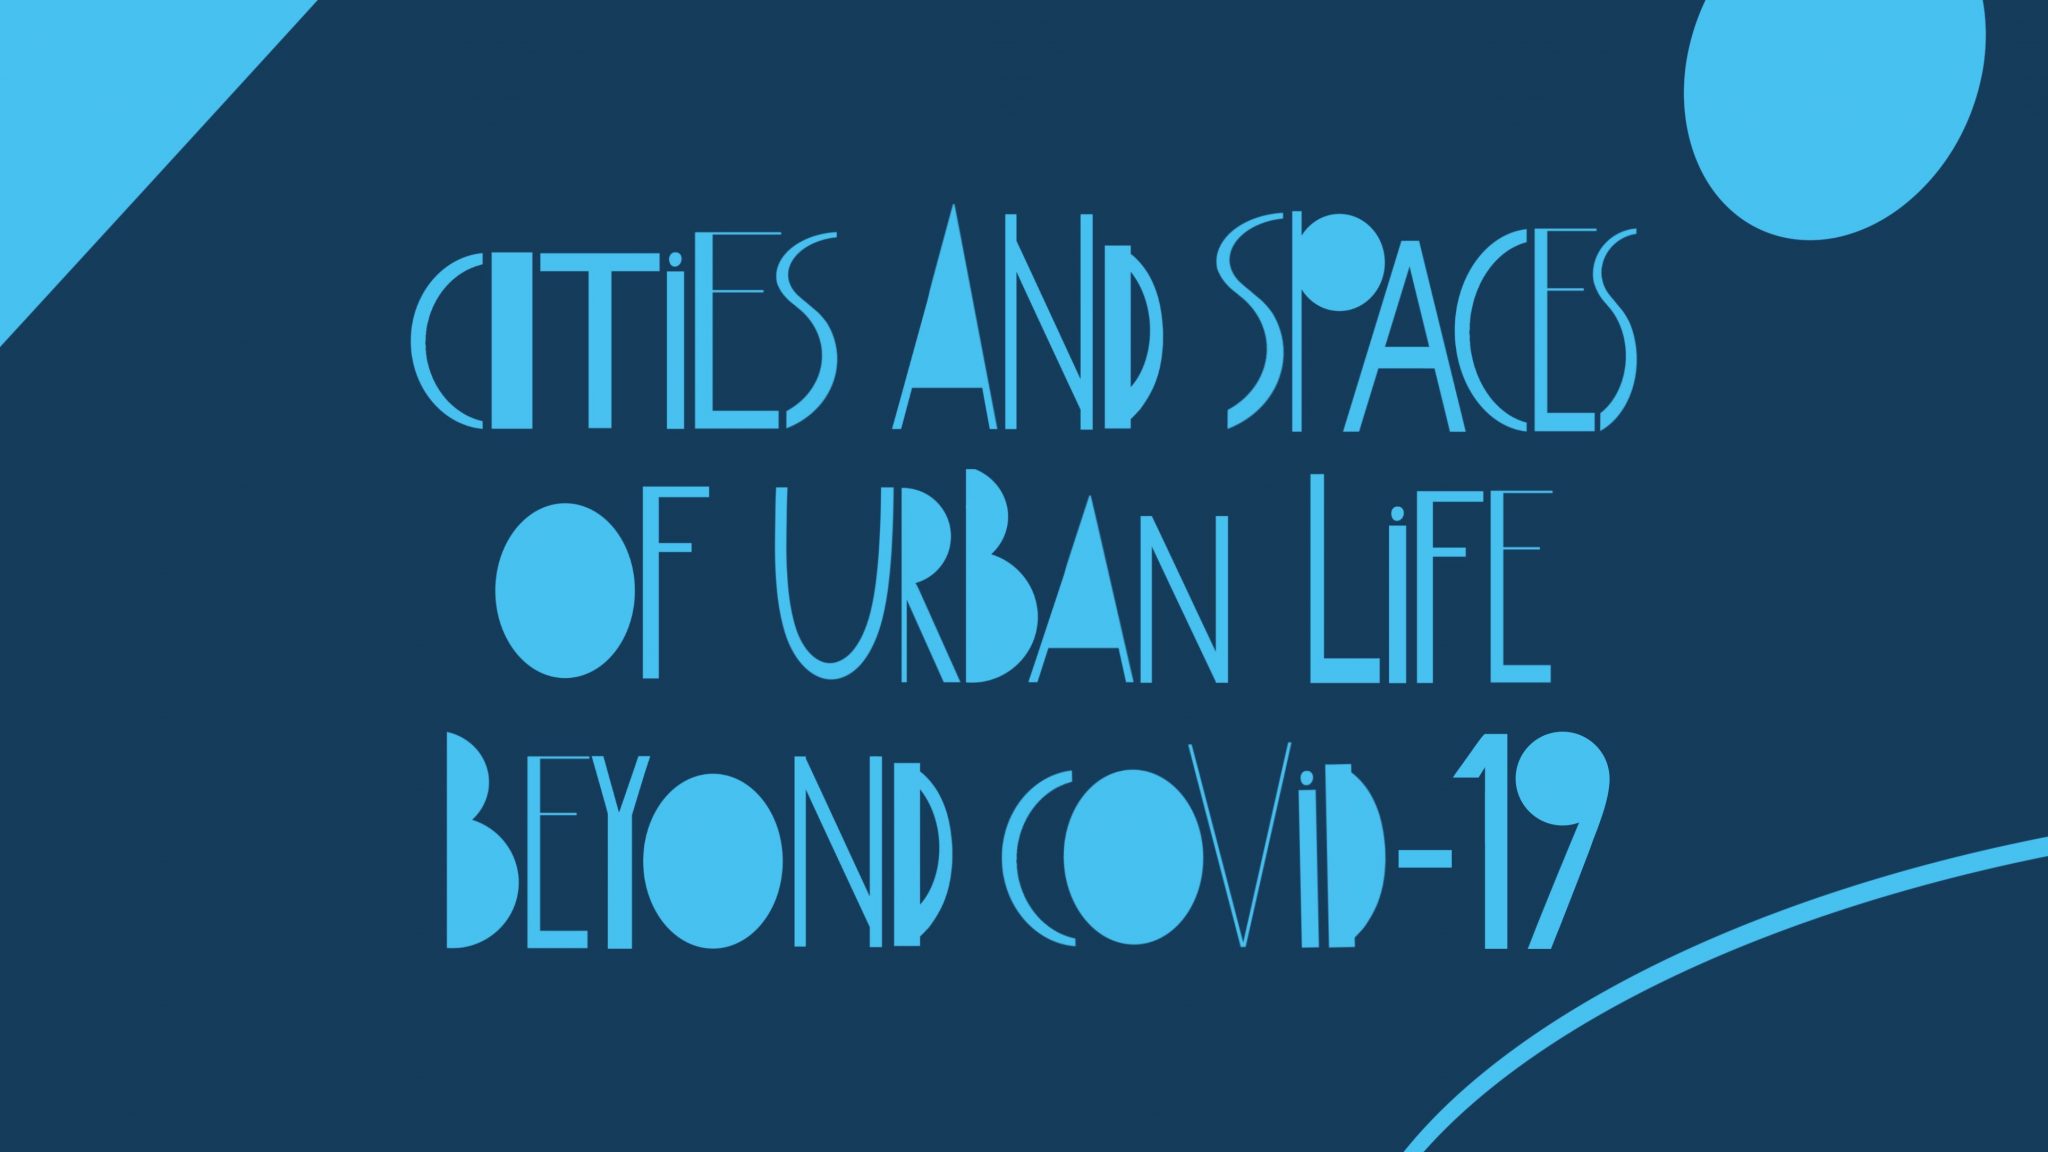 Days of Oris 21: Cities and spaces of urban life beyond Covid-19